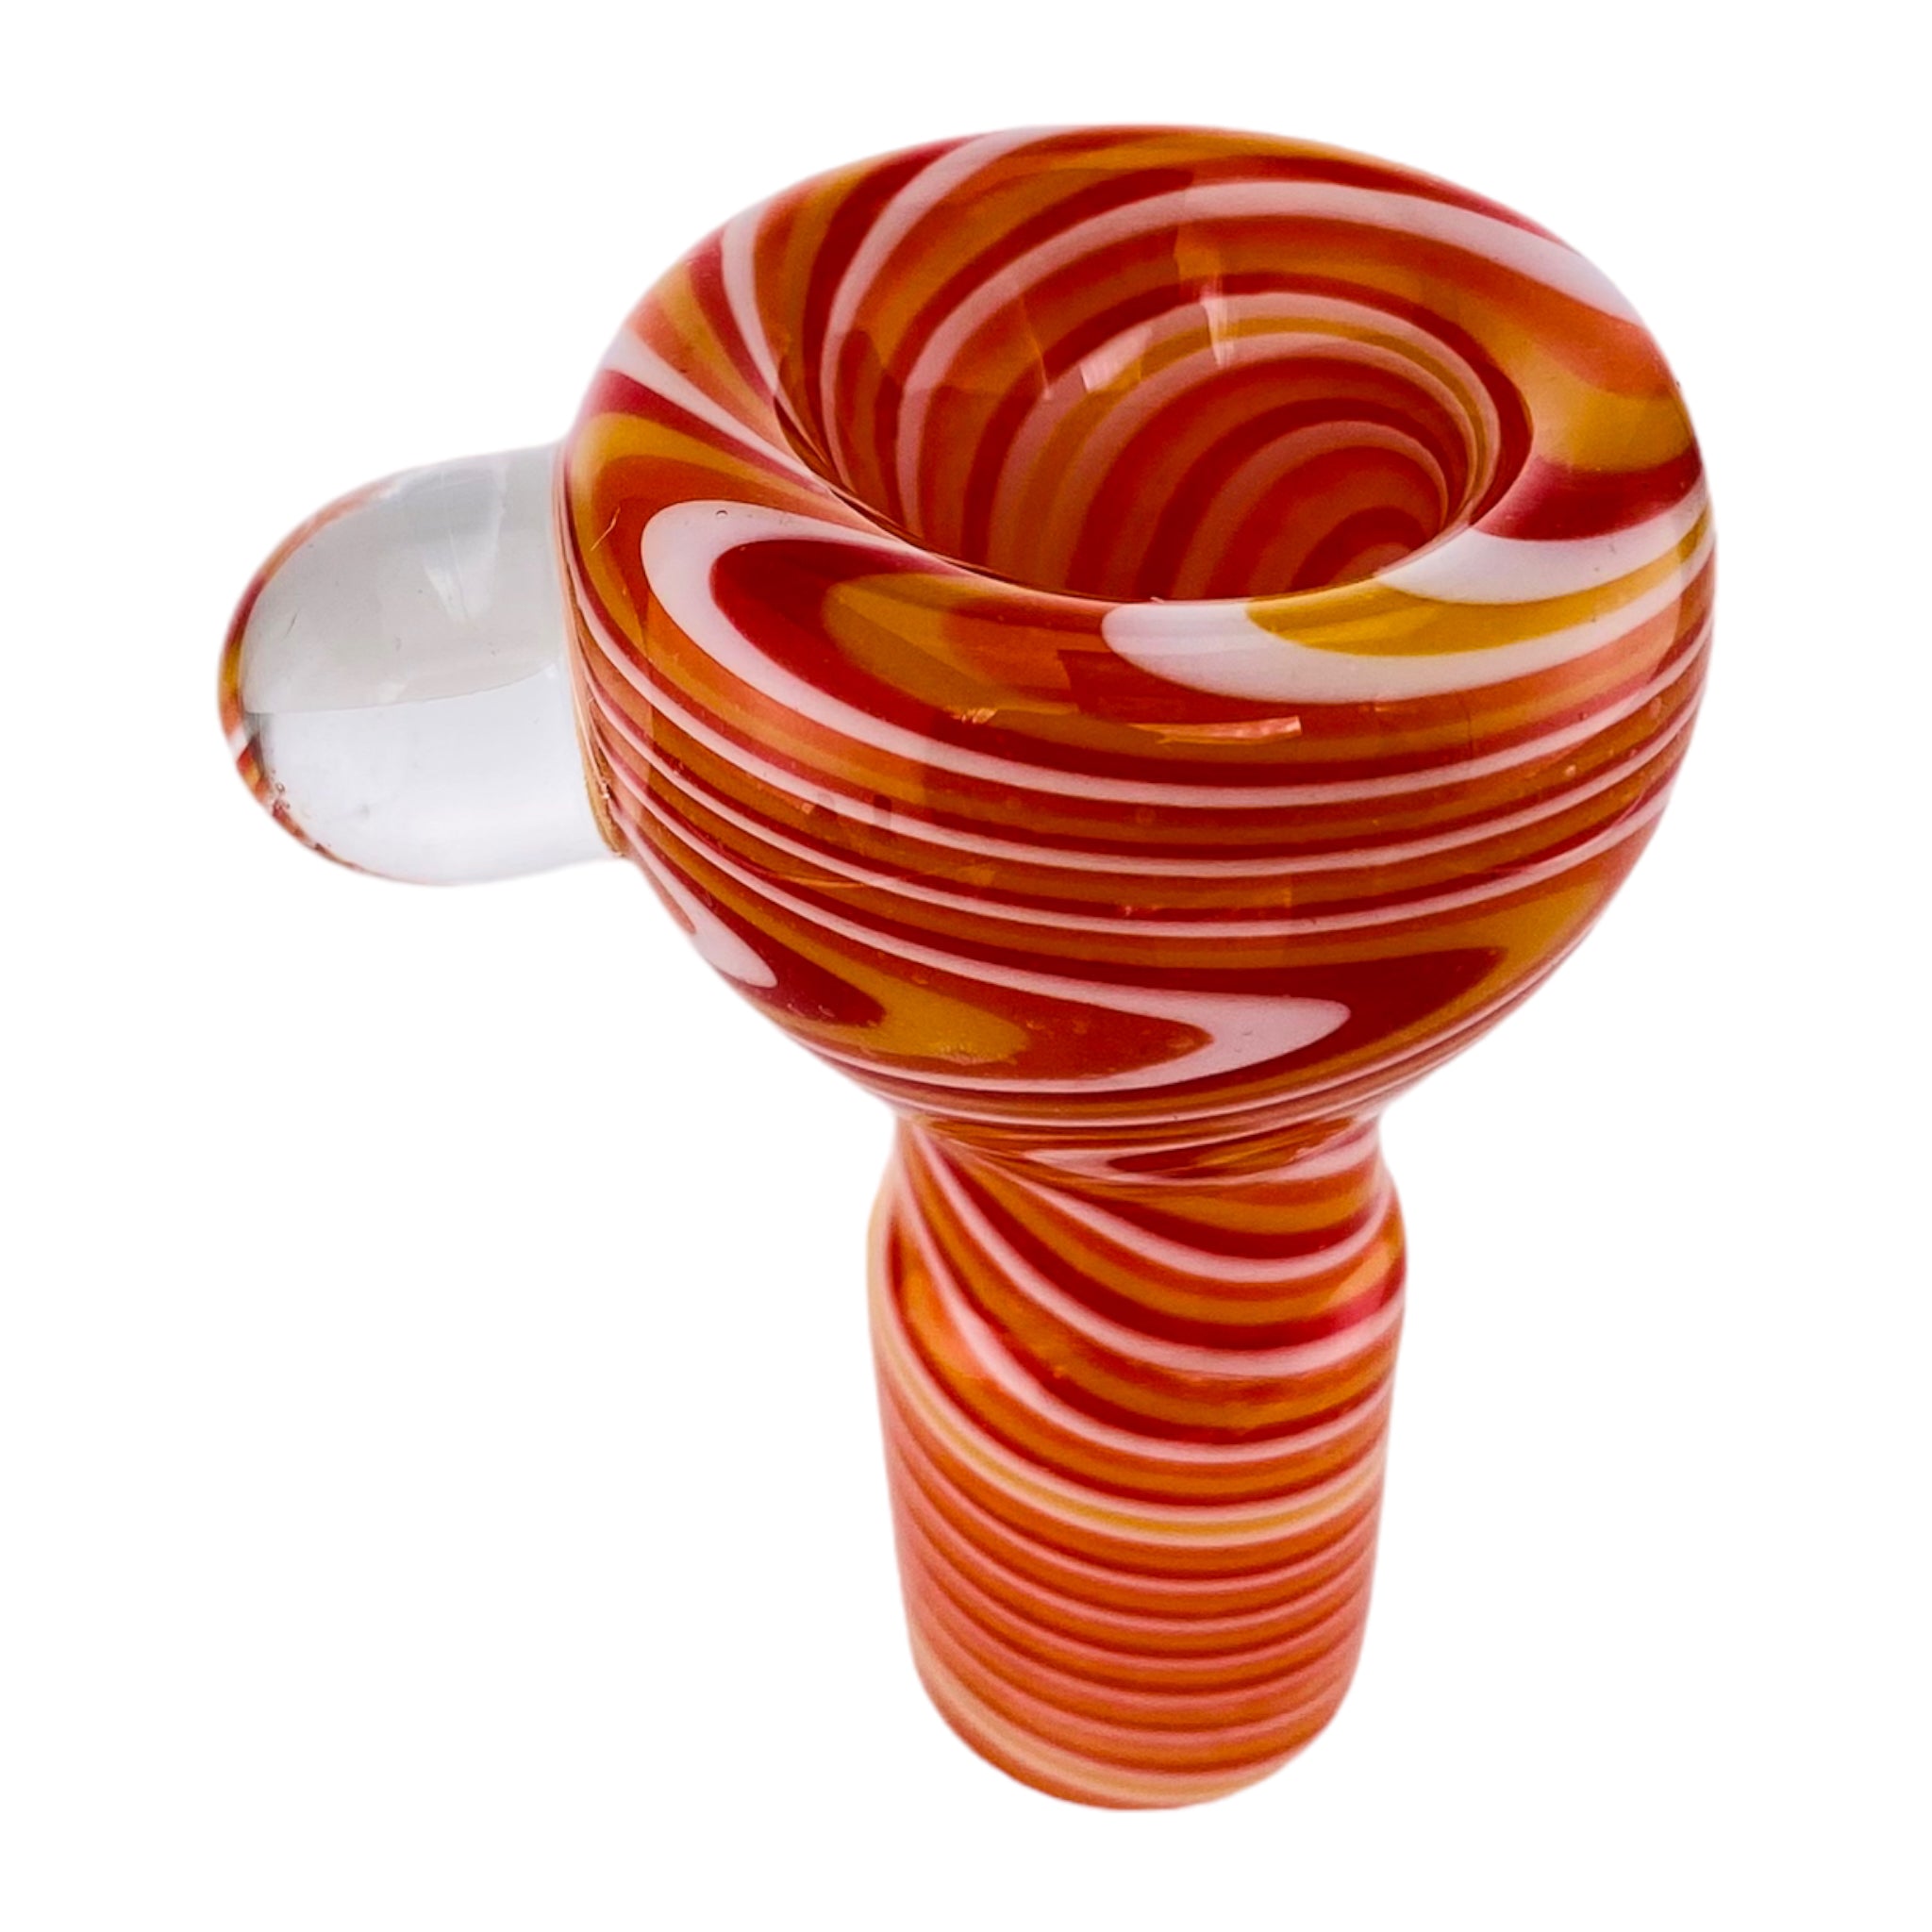 18mm Flower Bowl - Red Orange And Yellow Full Color Twist Bong Bowl Piece